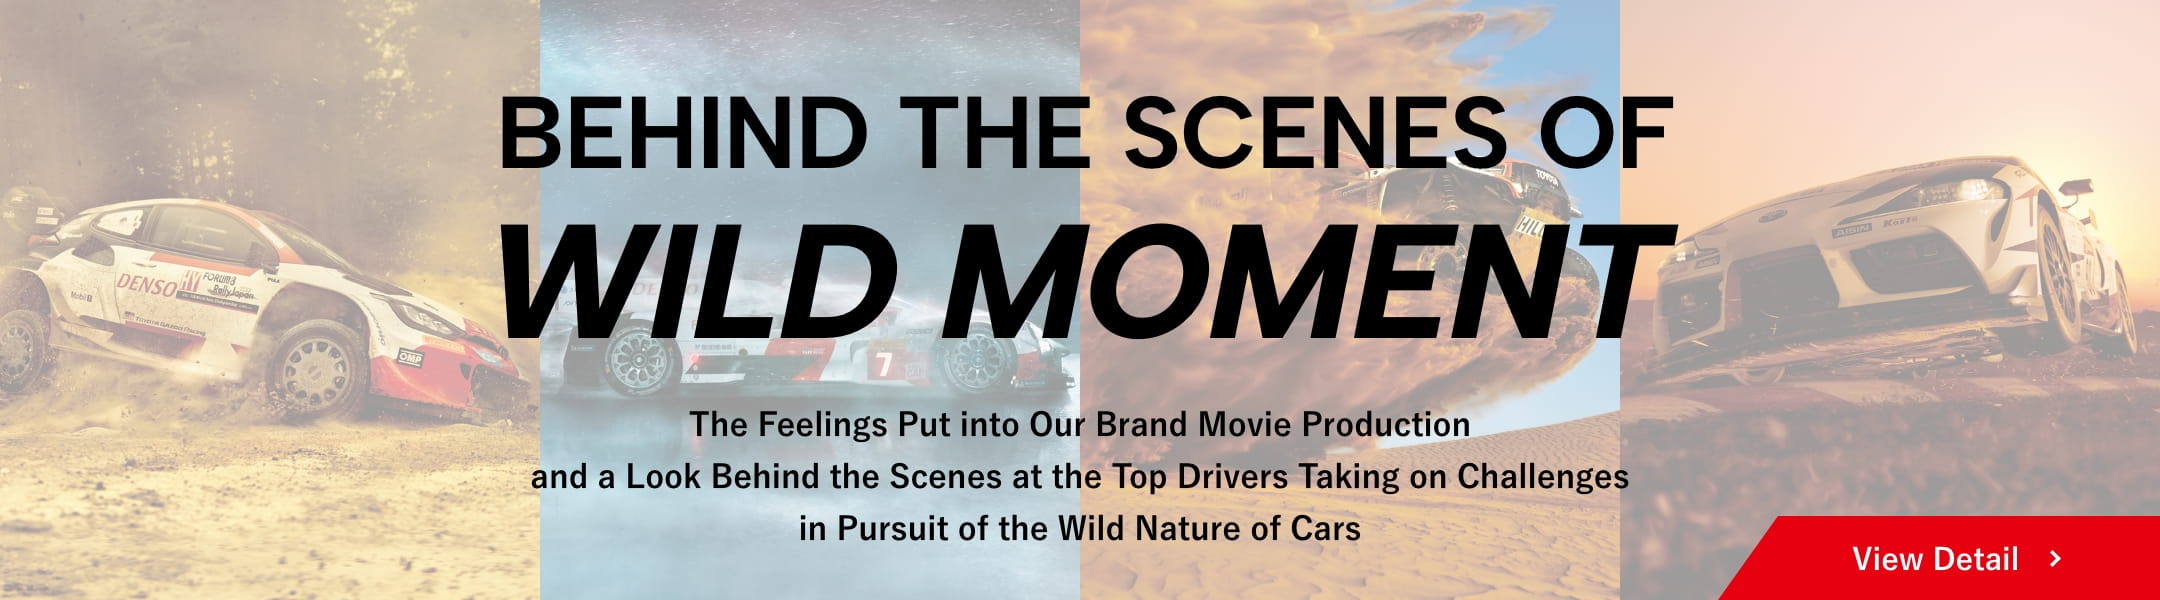 BEHIND THE SCENES OF WILD MOMENT